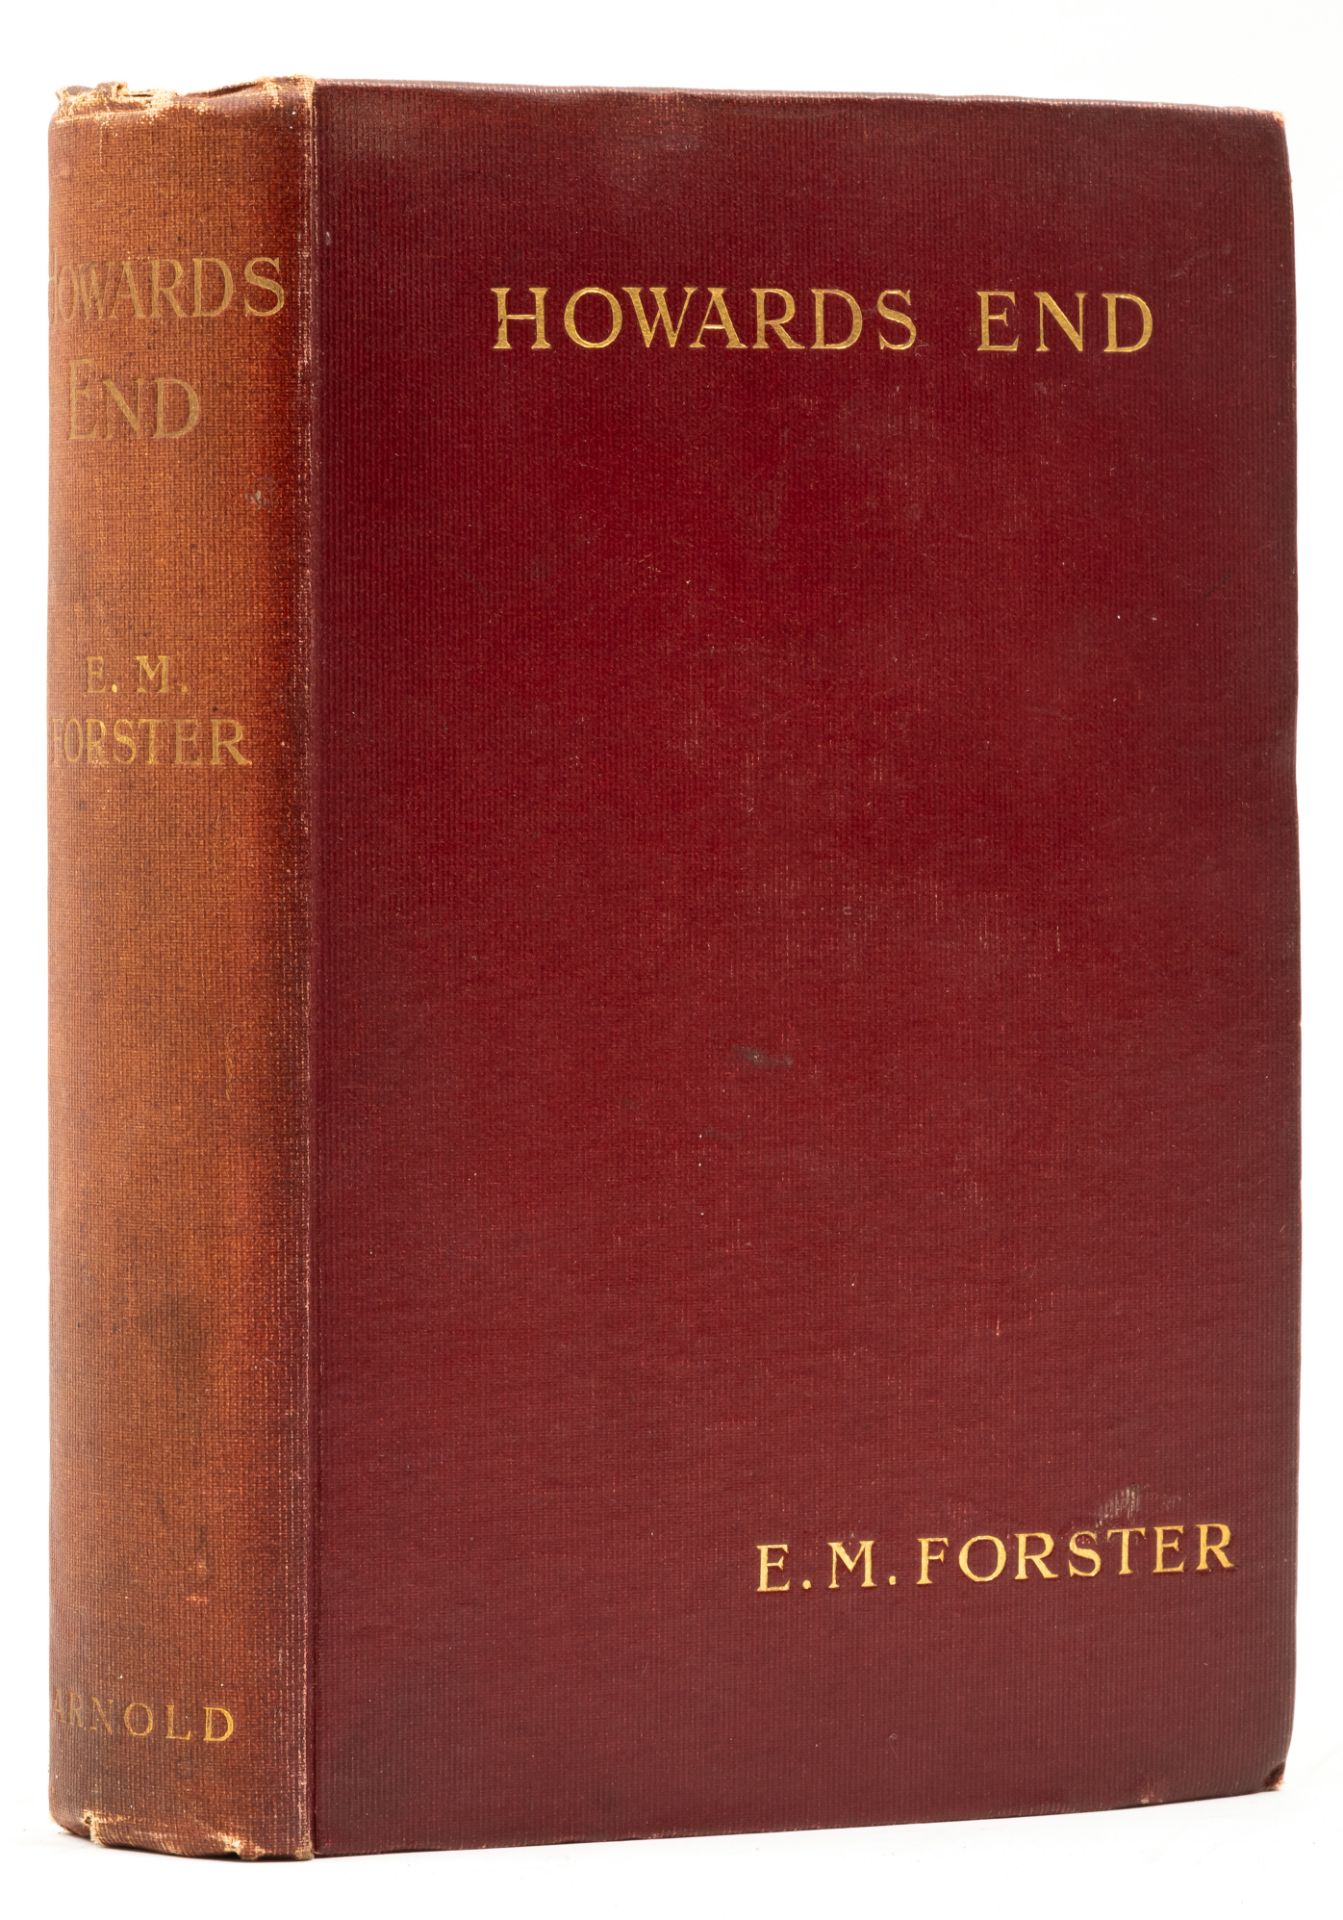 Forster (E.M.) Howards End, first edition, second issue, 1910.